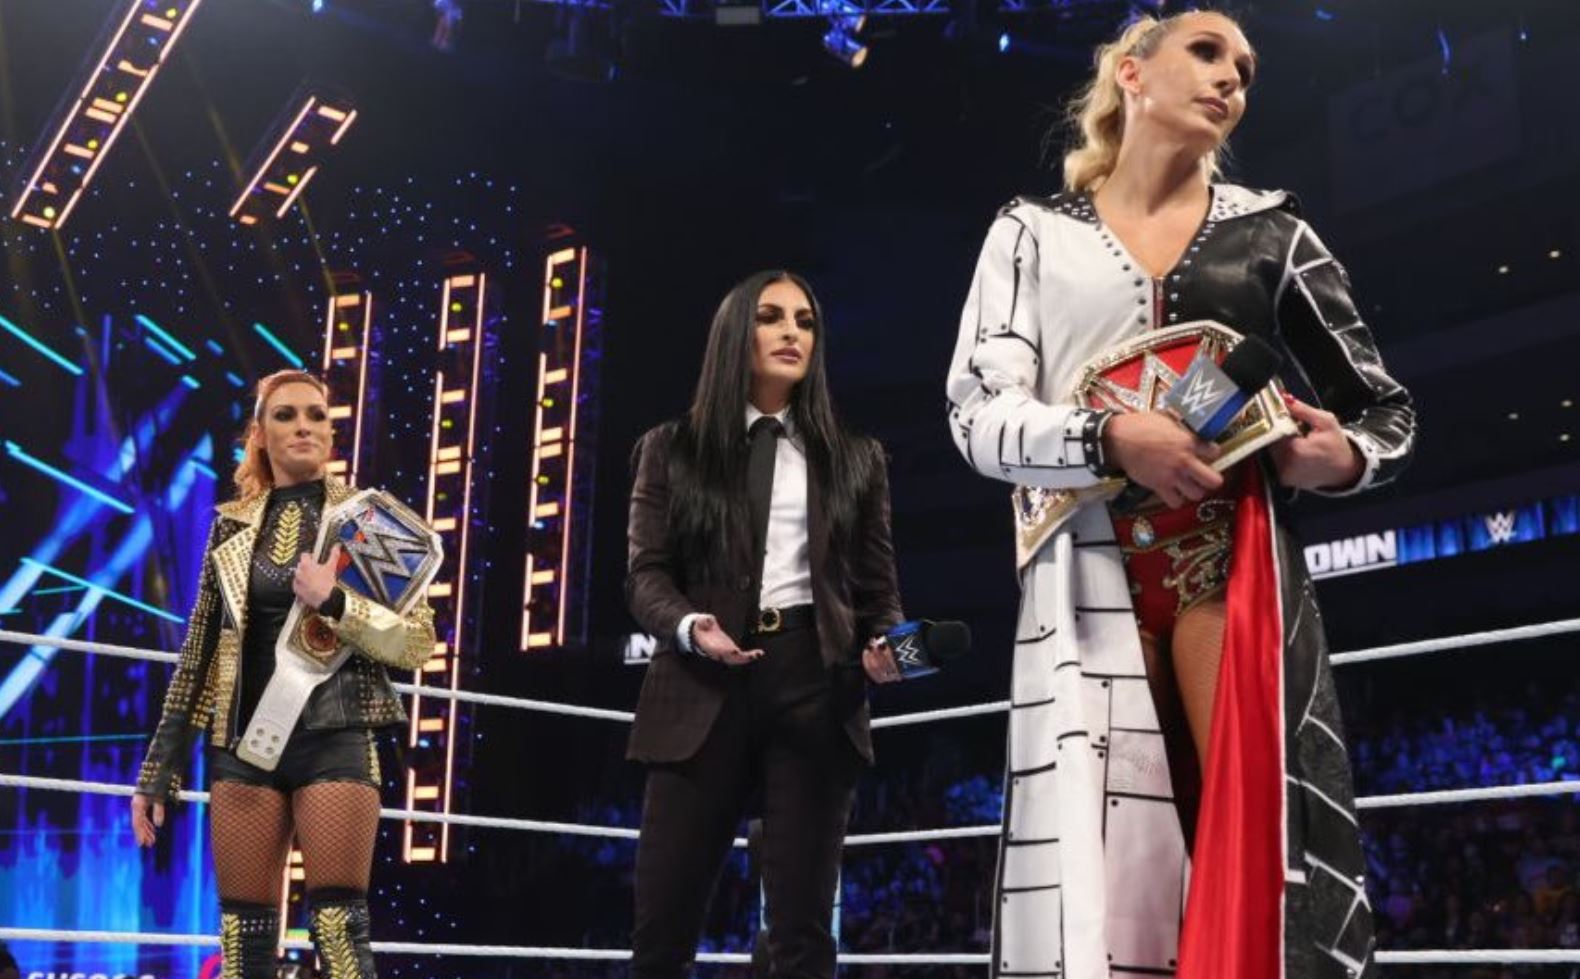 MORE ON CHARLOTTE FLAIR HEAT